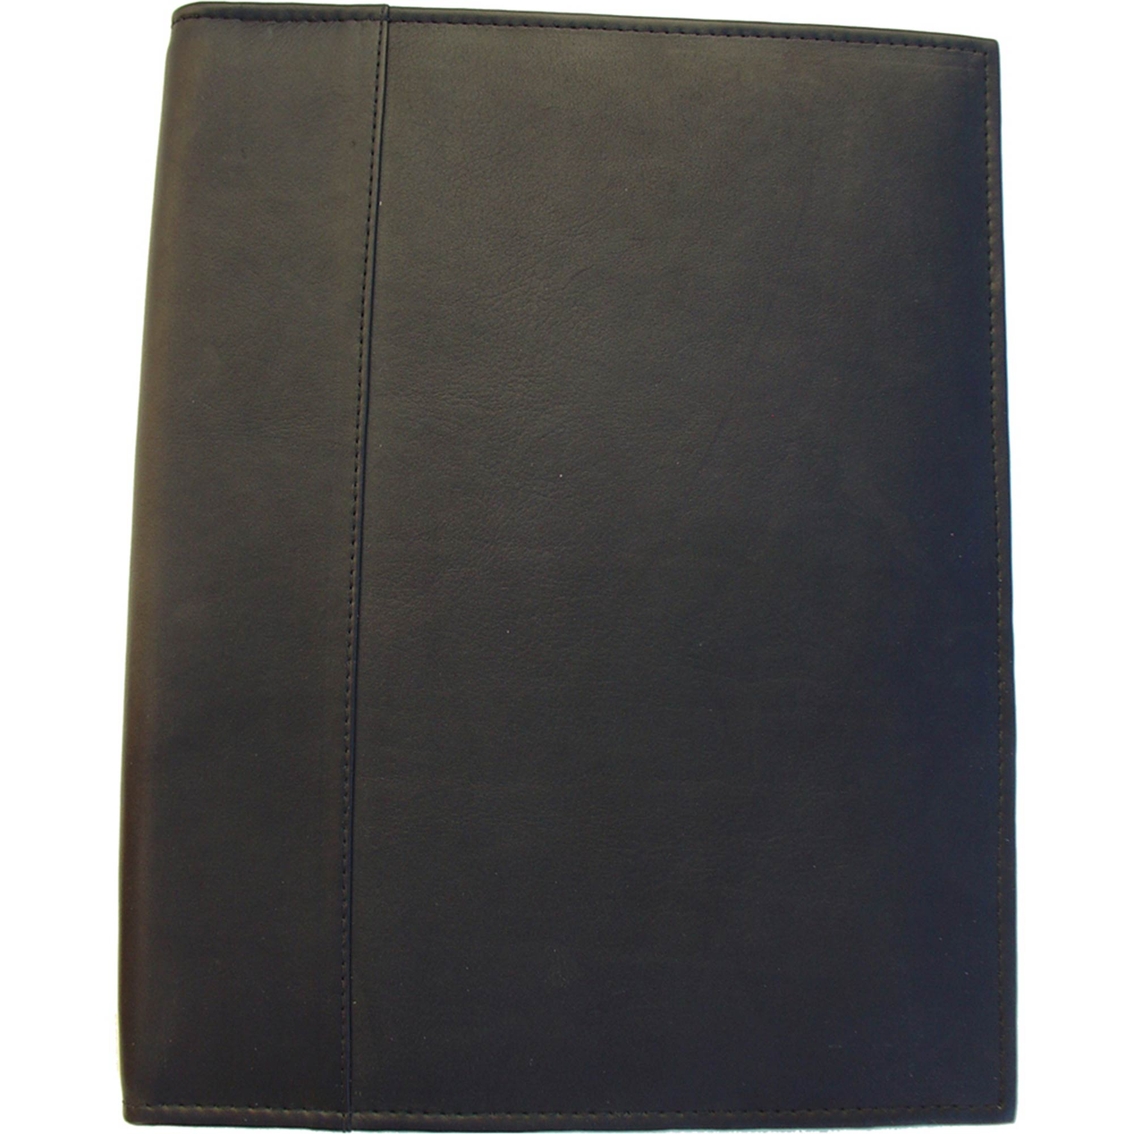 Piel Leather Letter Size Padfolio with Organizer